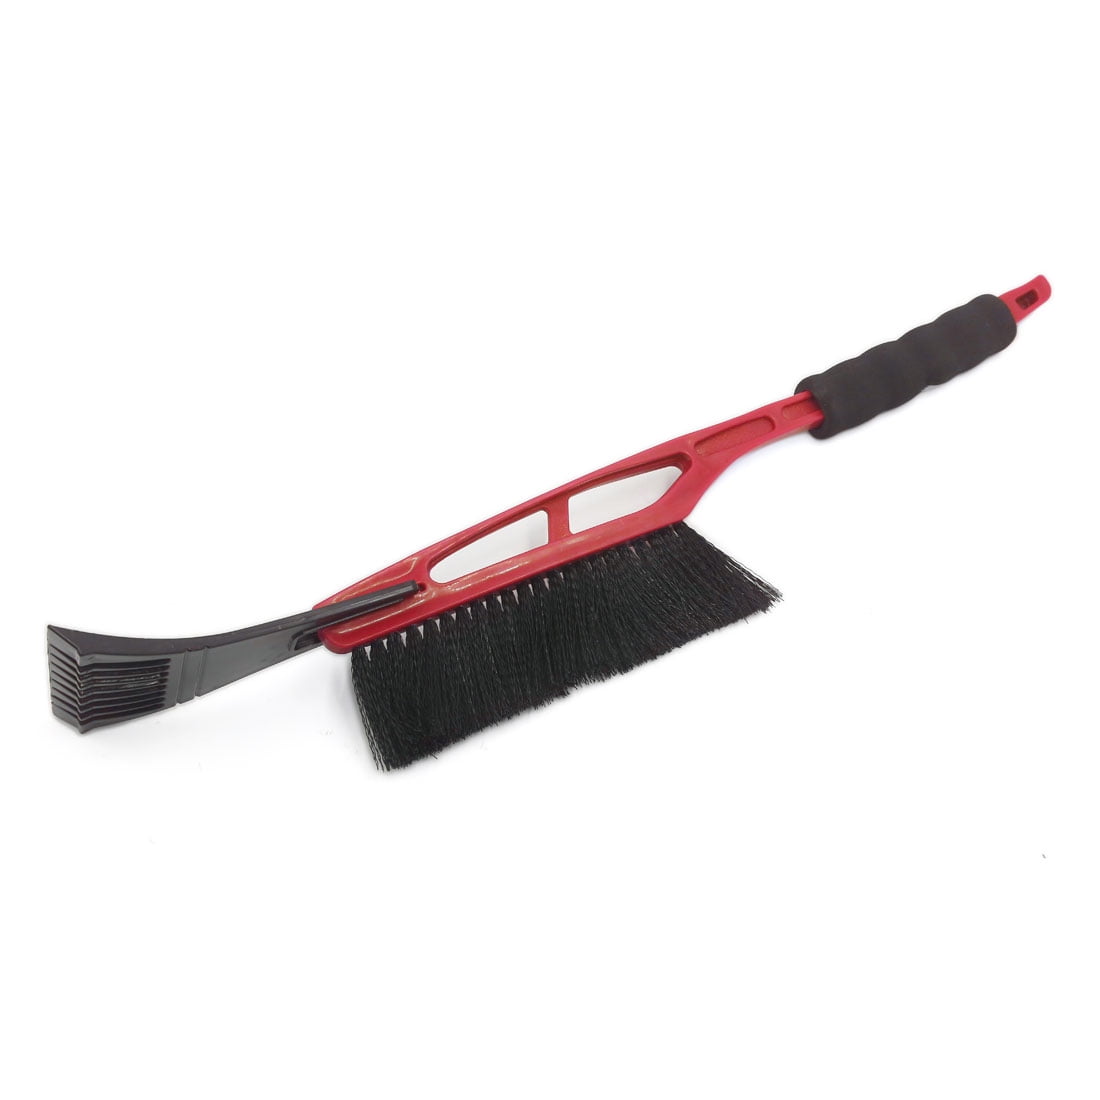 Car SUV Vehicle Snow Ice Scraper Snow Brush Shovel Removal Durable Cleaning Tool 